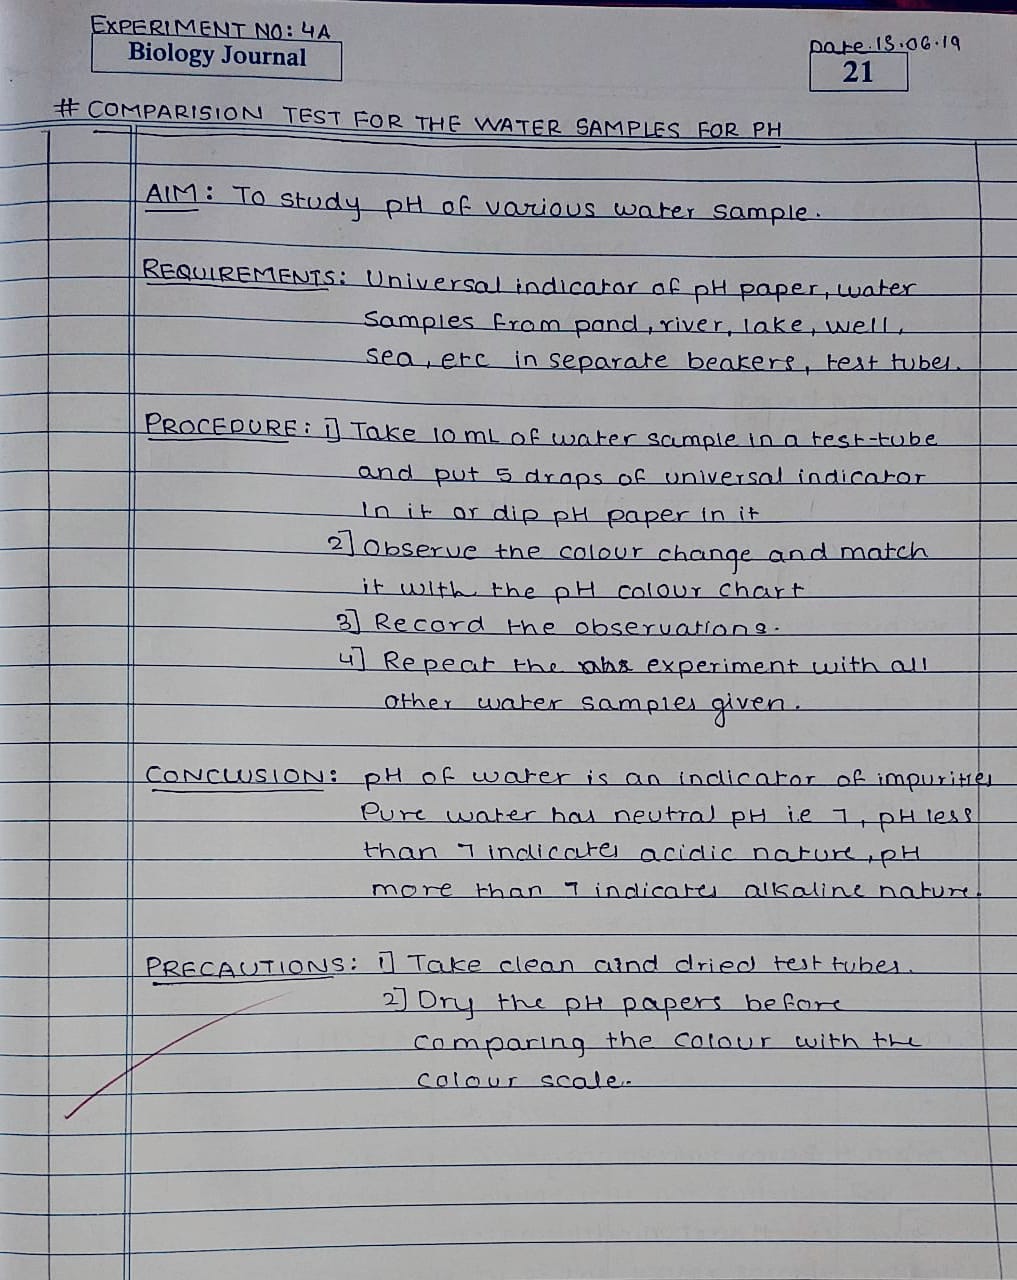 Maharashtra SSC Board 12 Class practical of Biology Journal solutions